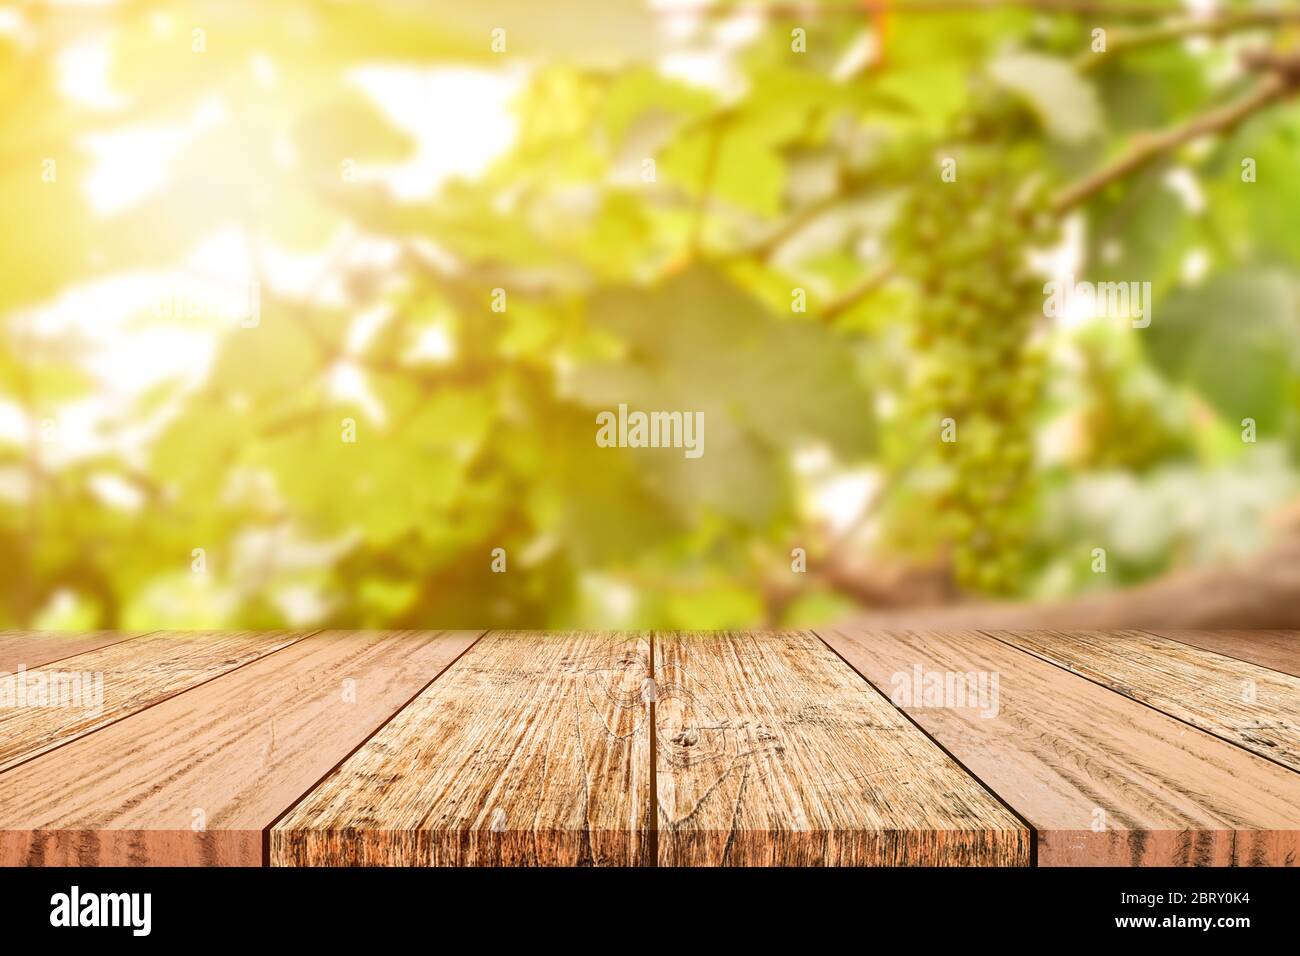 Empty Wooden Table Top On Blur Of Grape Garden Background For Your Product Display Or Design Key Visual Layout Stock Photo Alamy